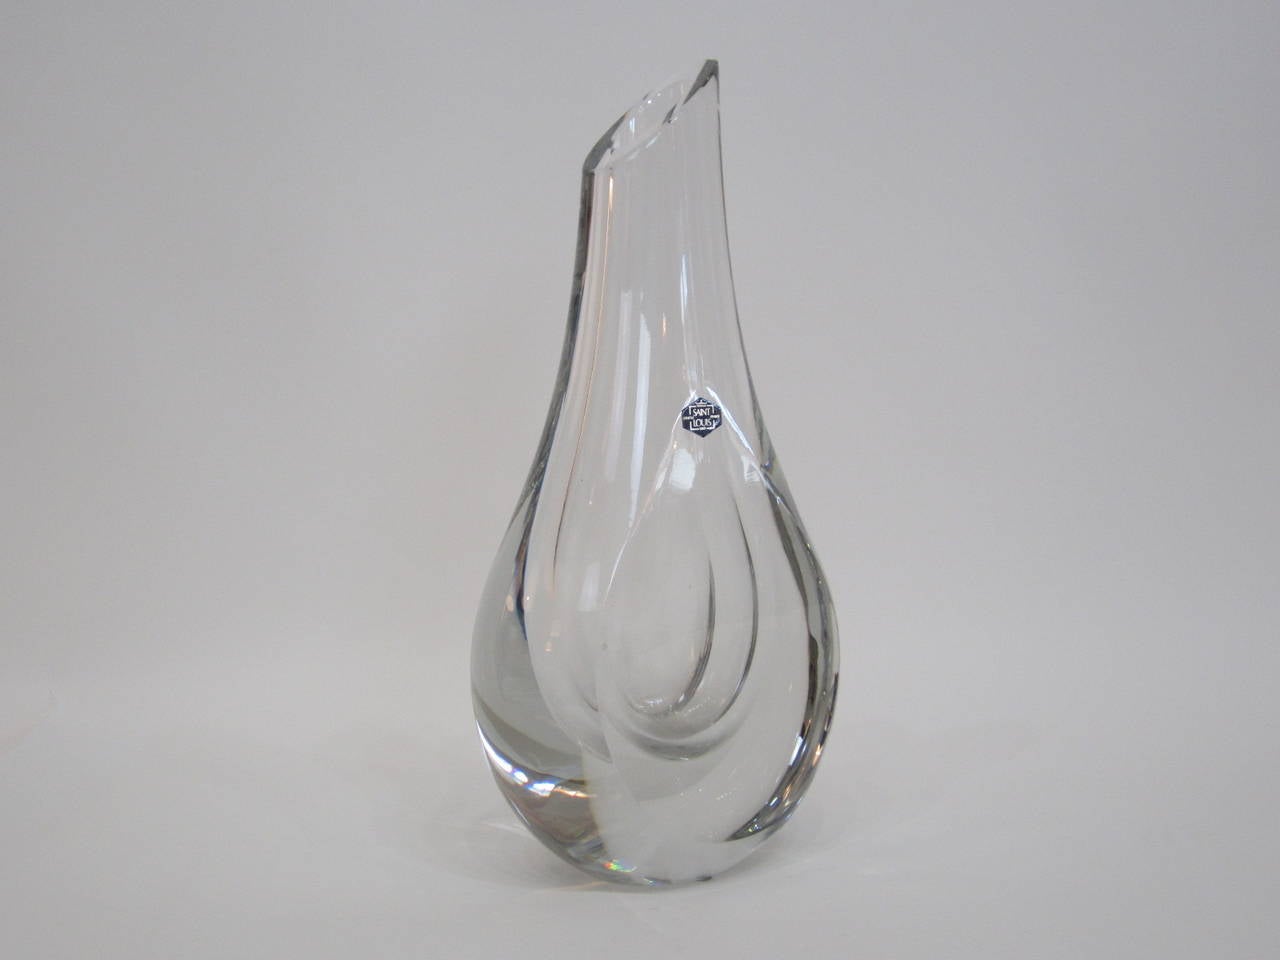 Gorgeous heavy weight crystal vase by Saint Louis Crystal Co purchased from the counter of the Hermes store in Paris.